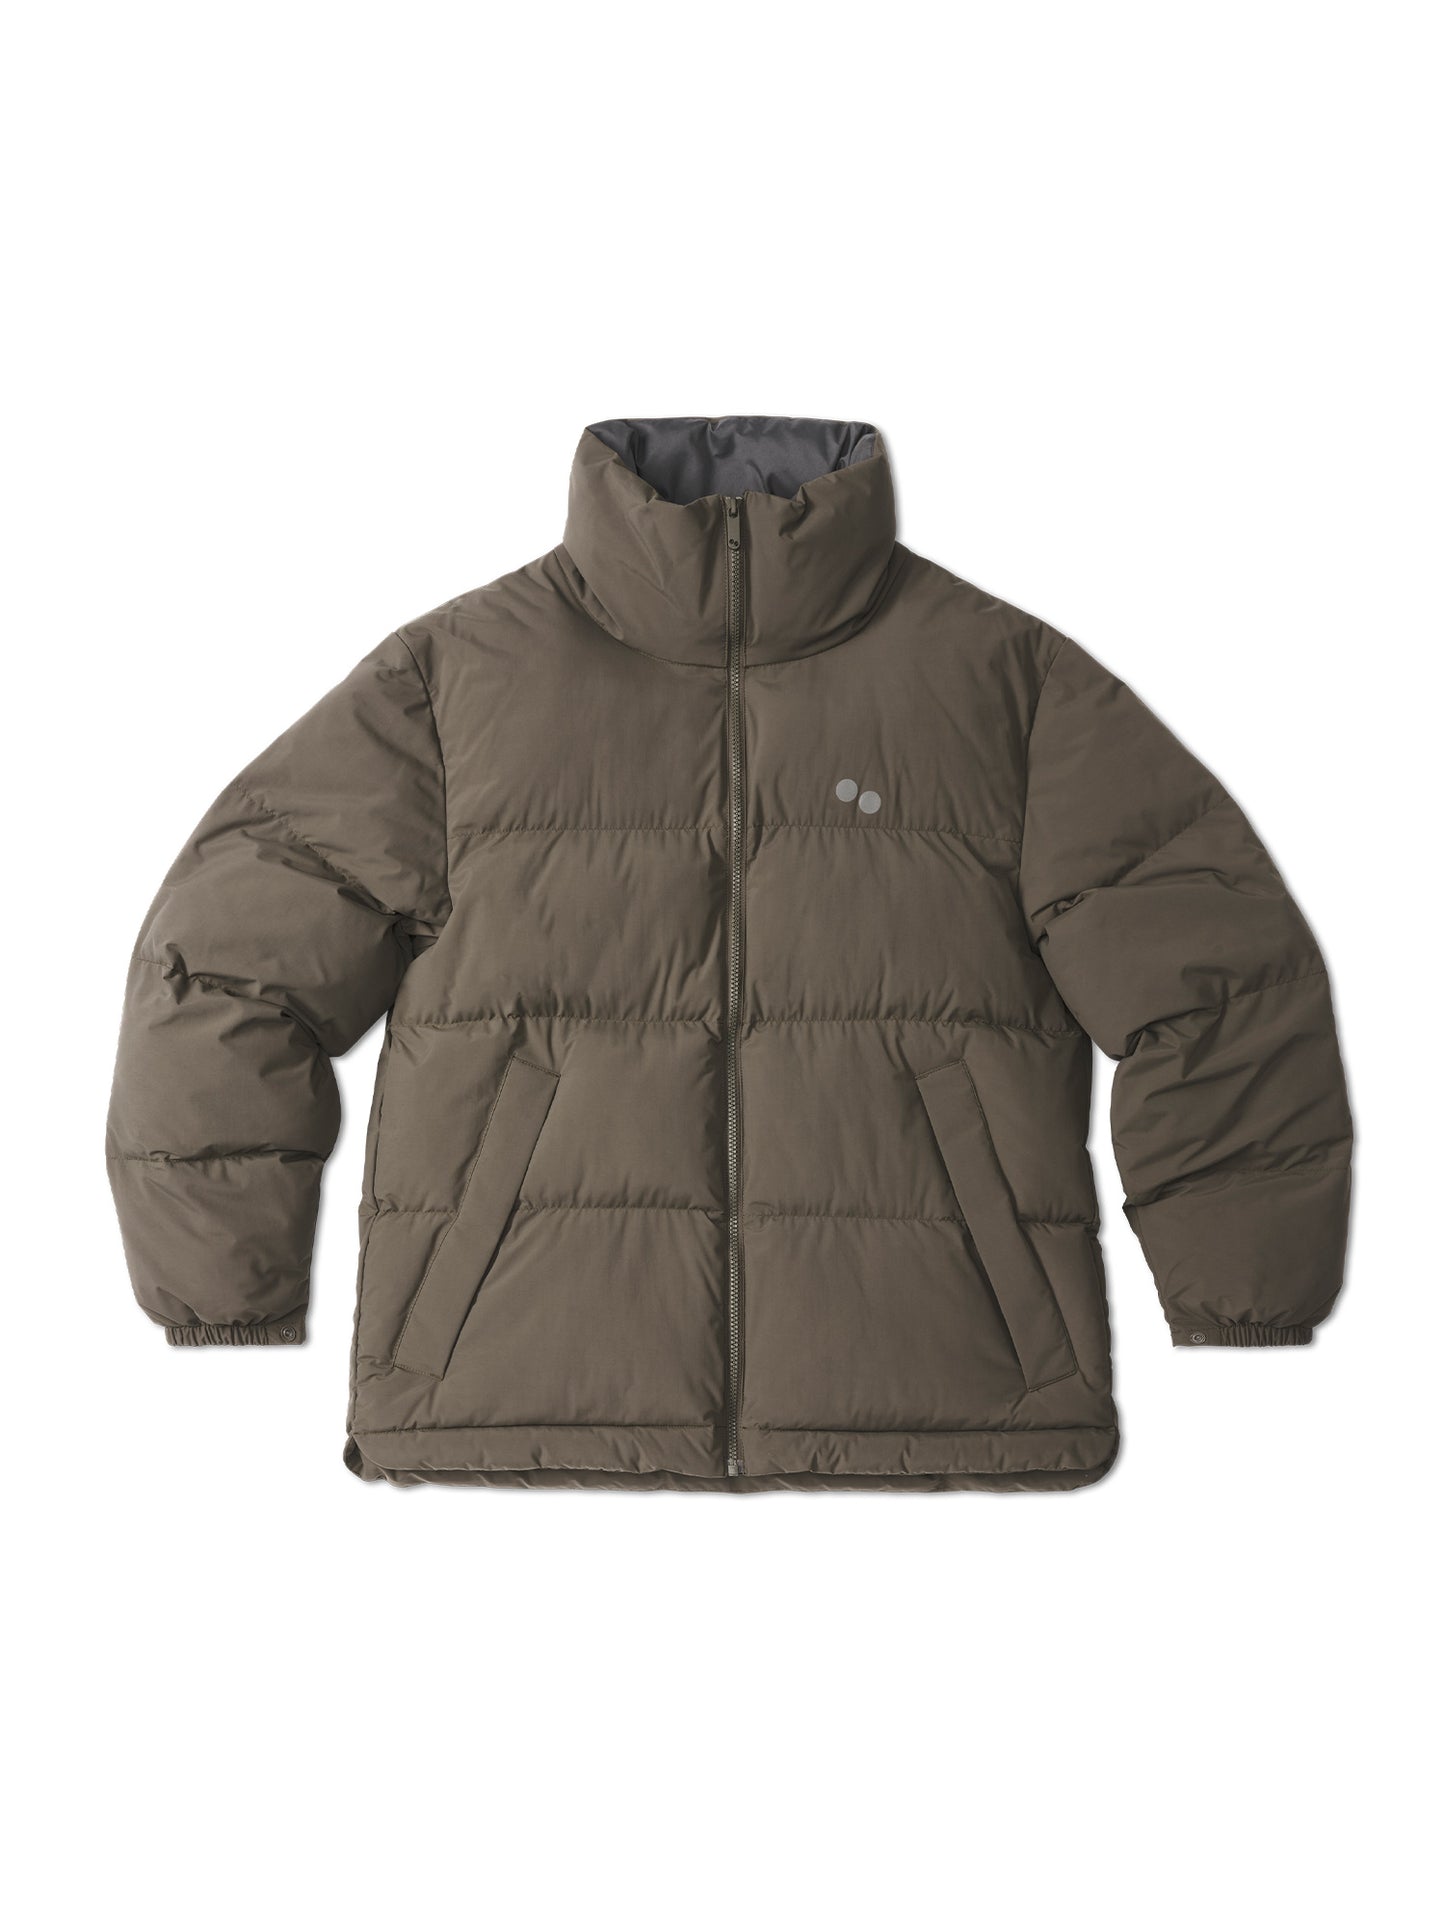 pinqponq-Puffer-Jacket-Unisex-Coffee-Brown-front